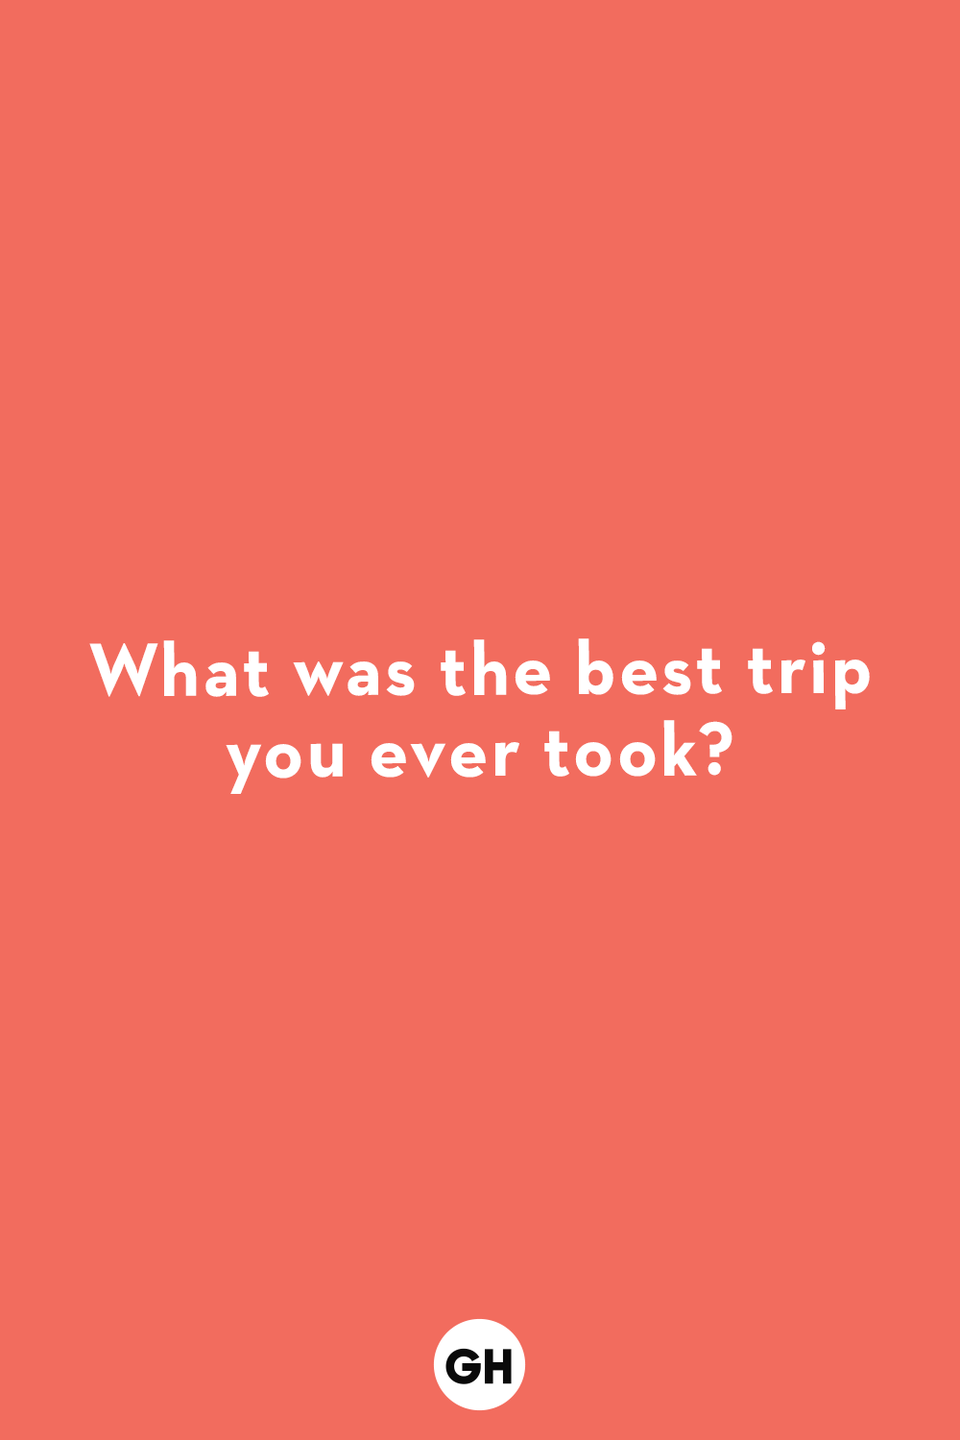 a question card for kids asks what was the best trip you ever took